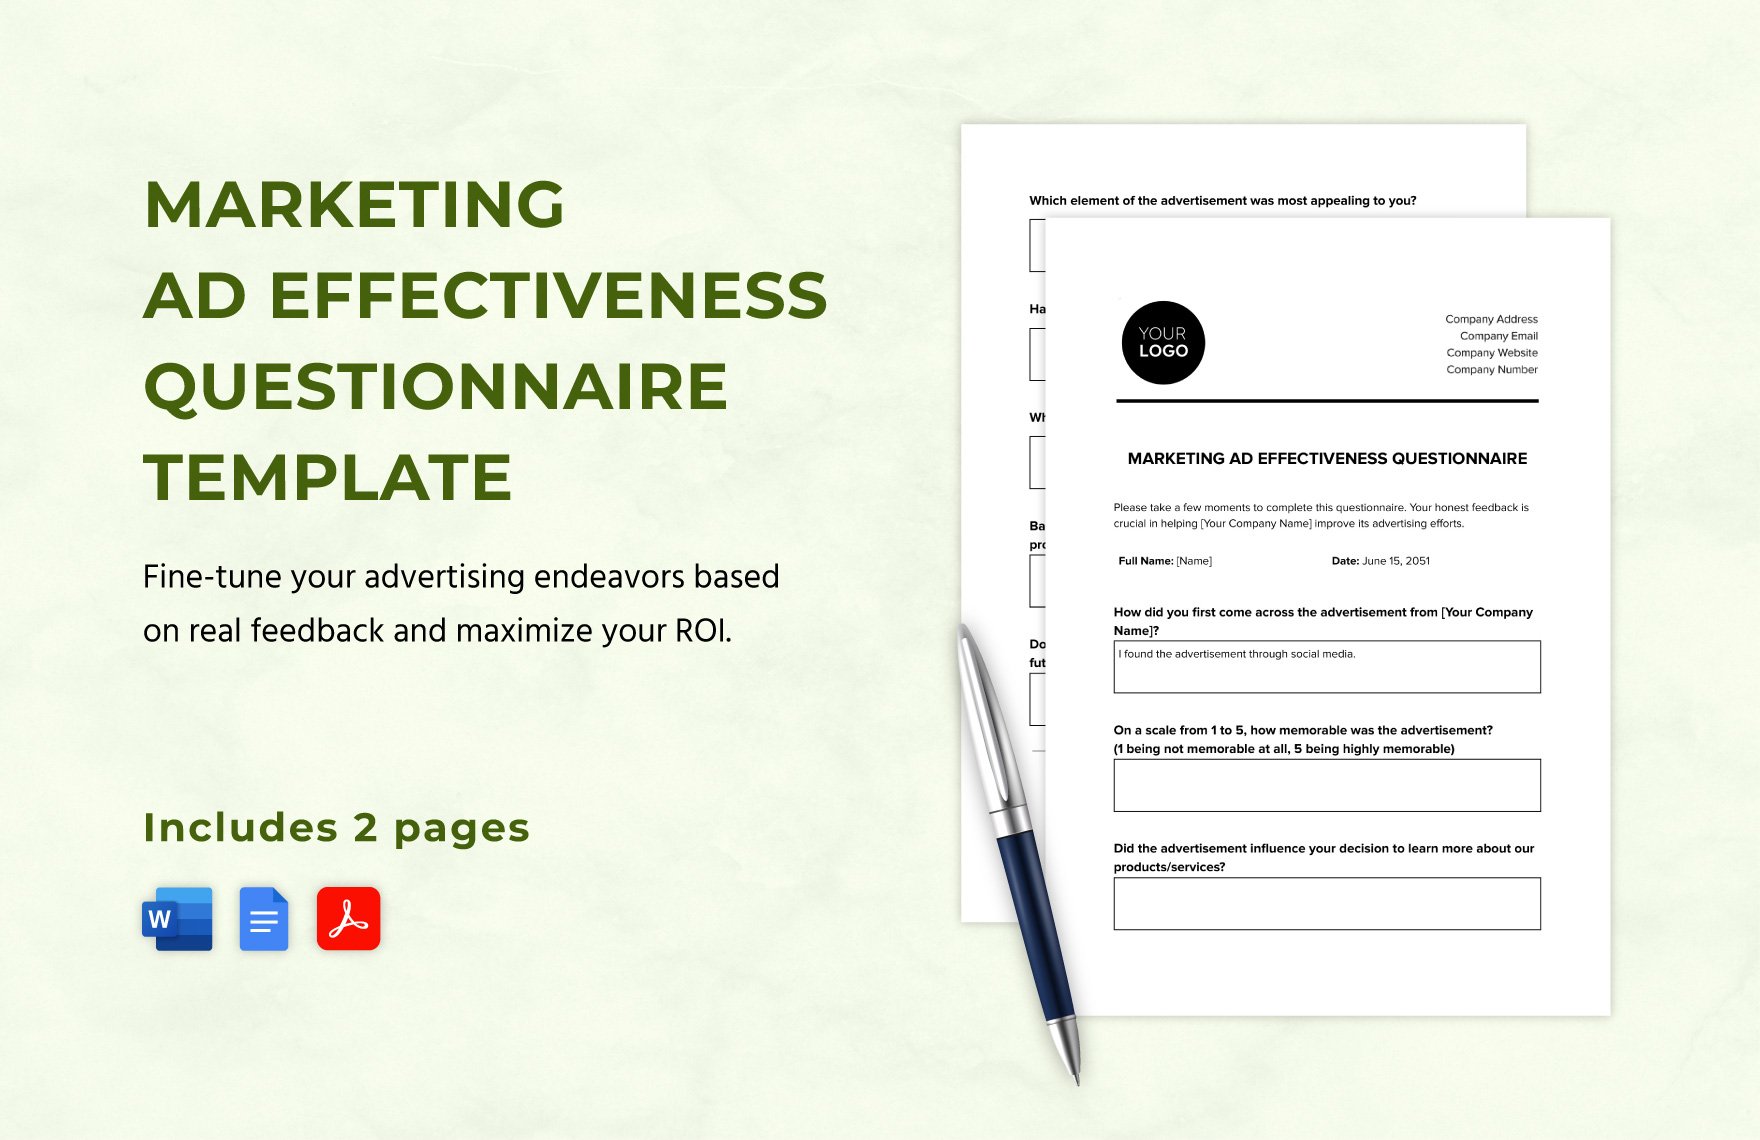 Marketing Ad Effectiveness Questionnaire Template in Word, Google Docs, PDF